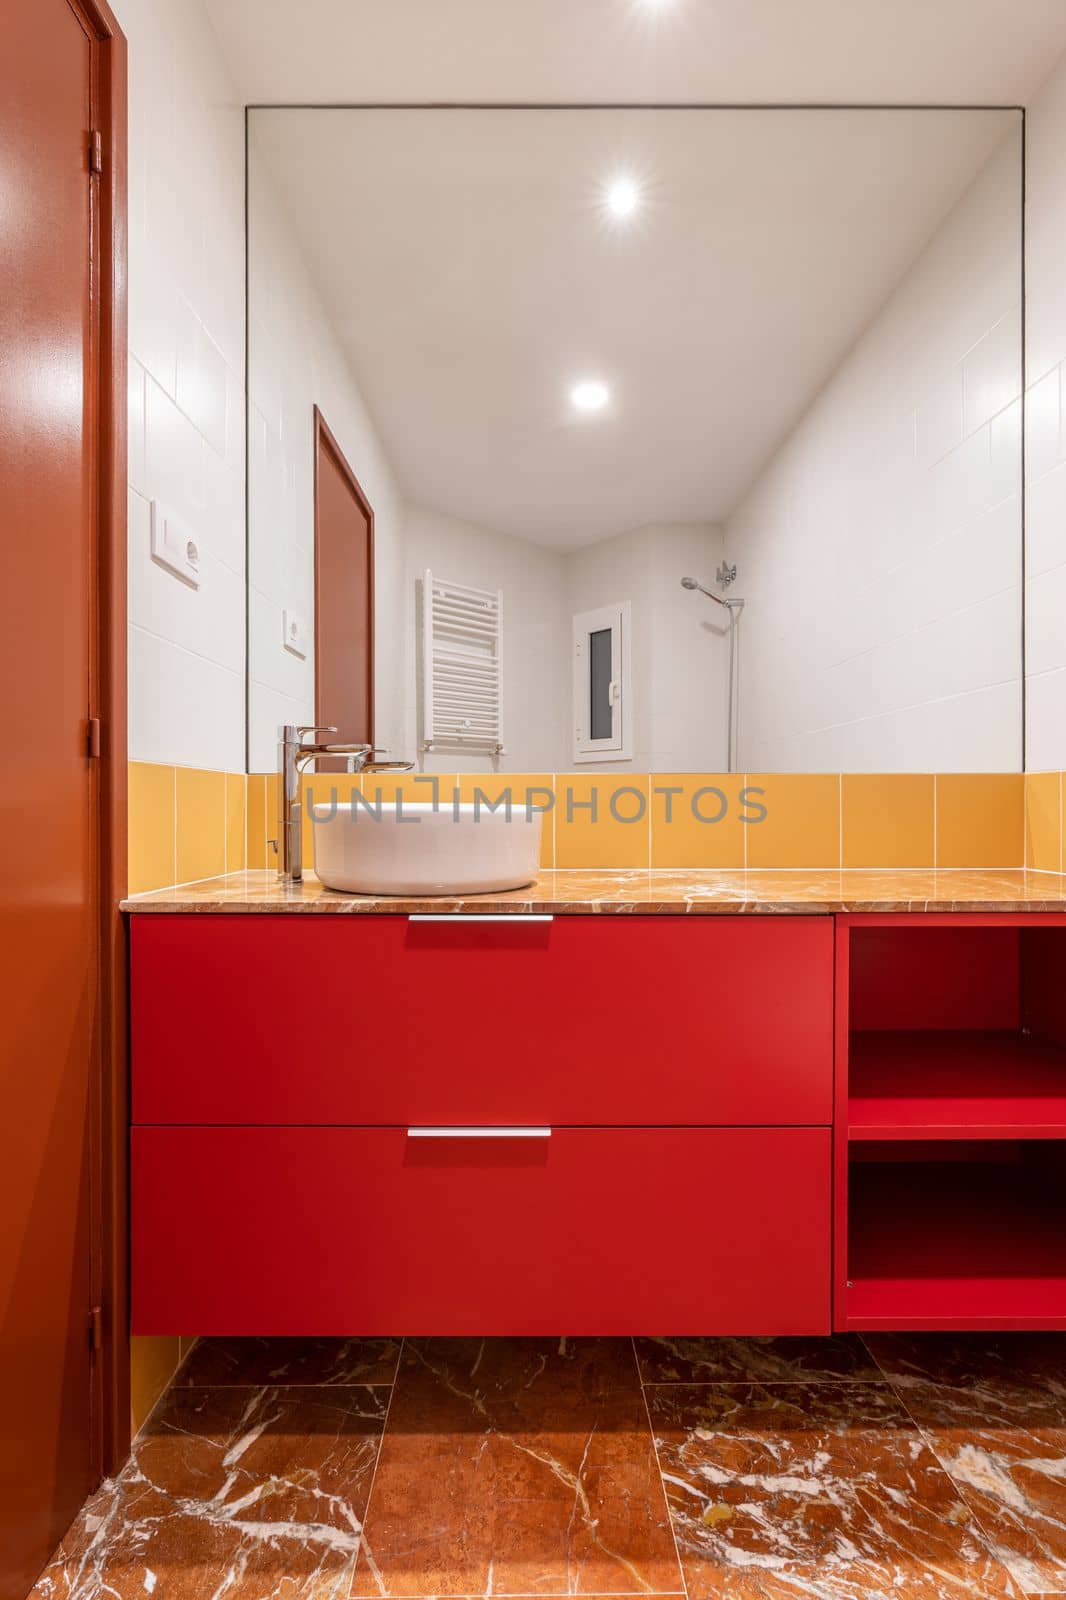 Overhead white sink on a red cabinet in a bright white and yellow bathroom White and yellow tiles on the wall and porcelain stoneware brown floor tiles. Huge bathroom wall mirror. Brown bathroom door by apavlin